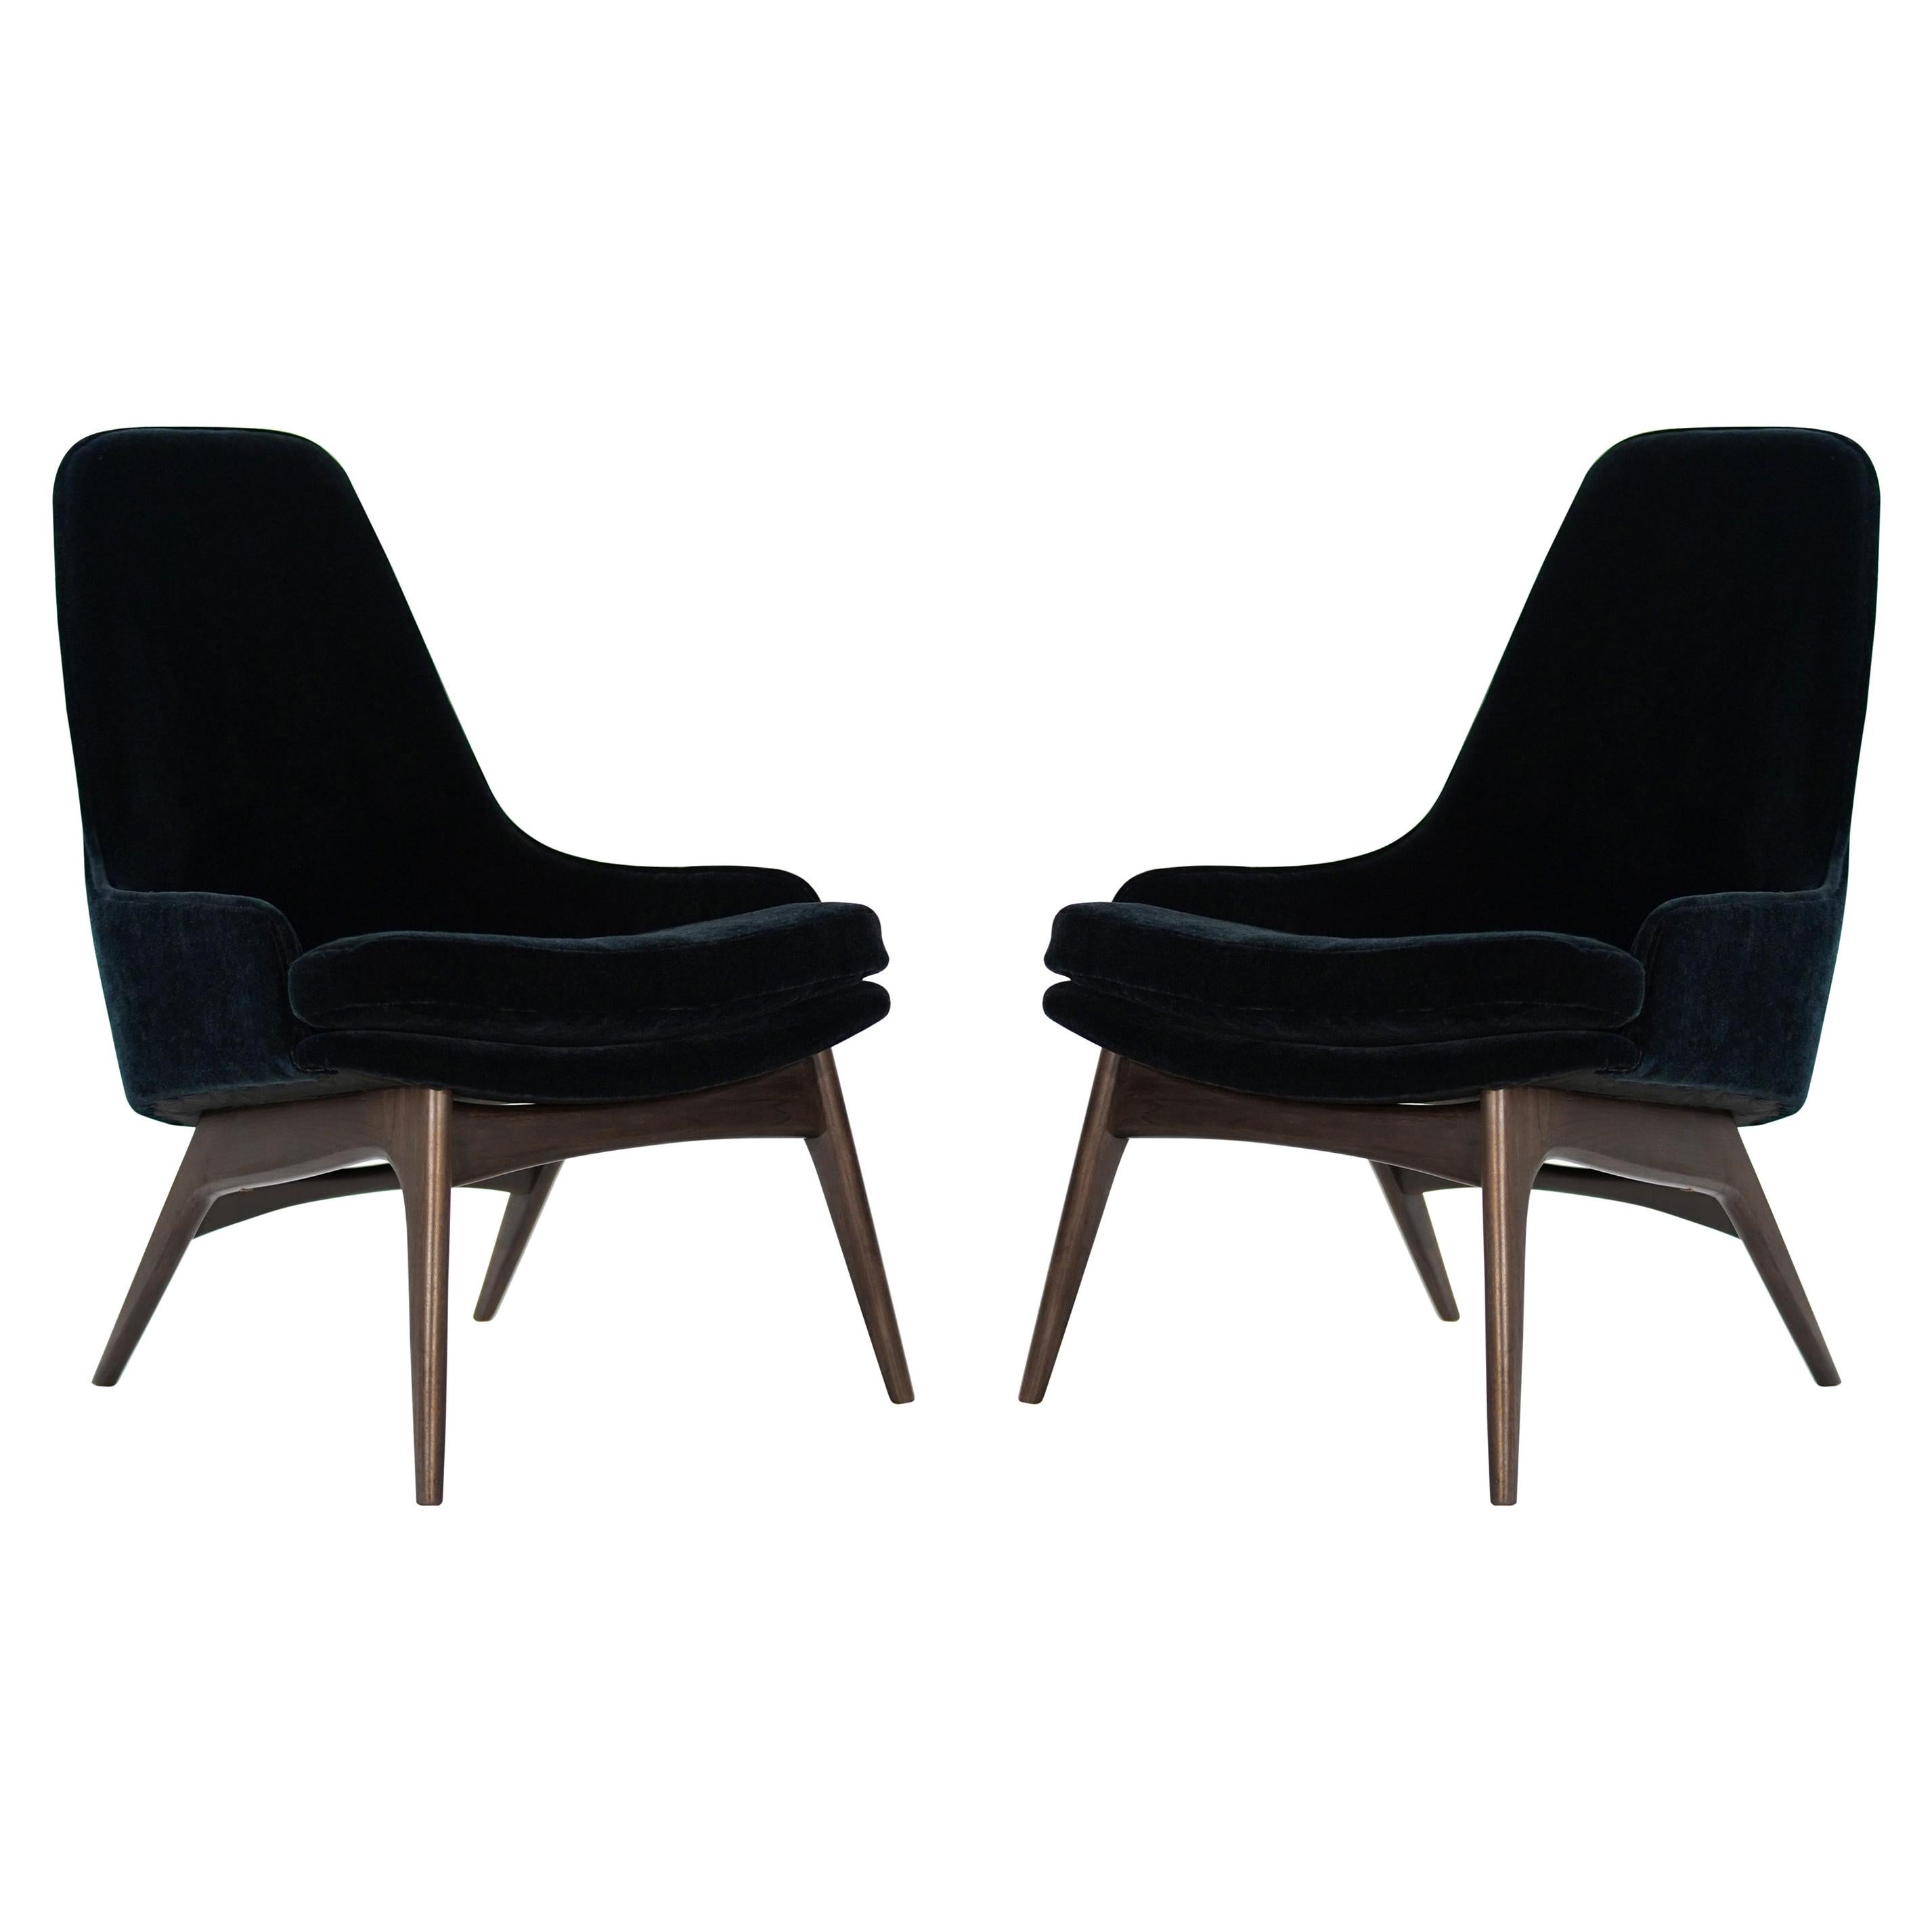 Set of Slipper Chairs by Adrian Pearsall in Navy Mohair, 1950s